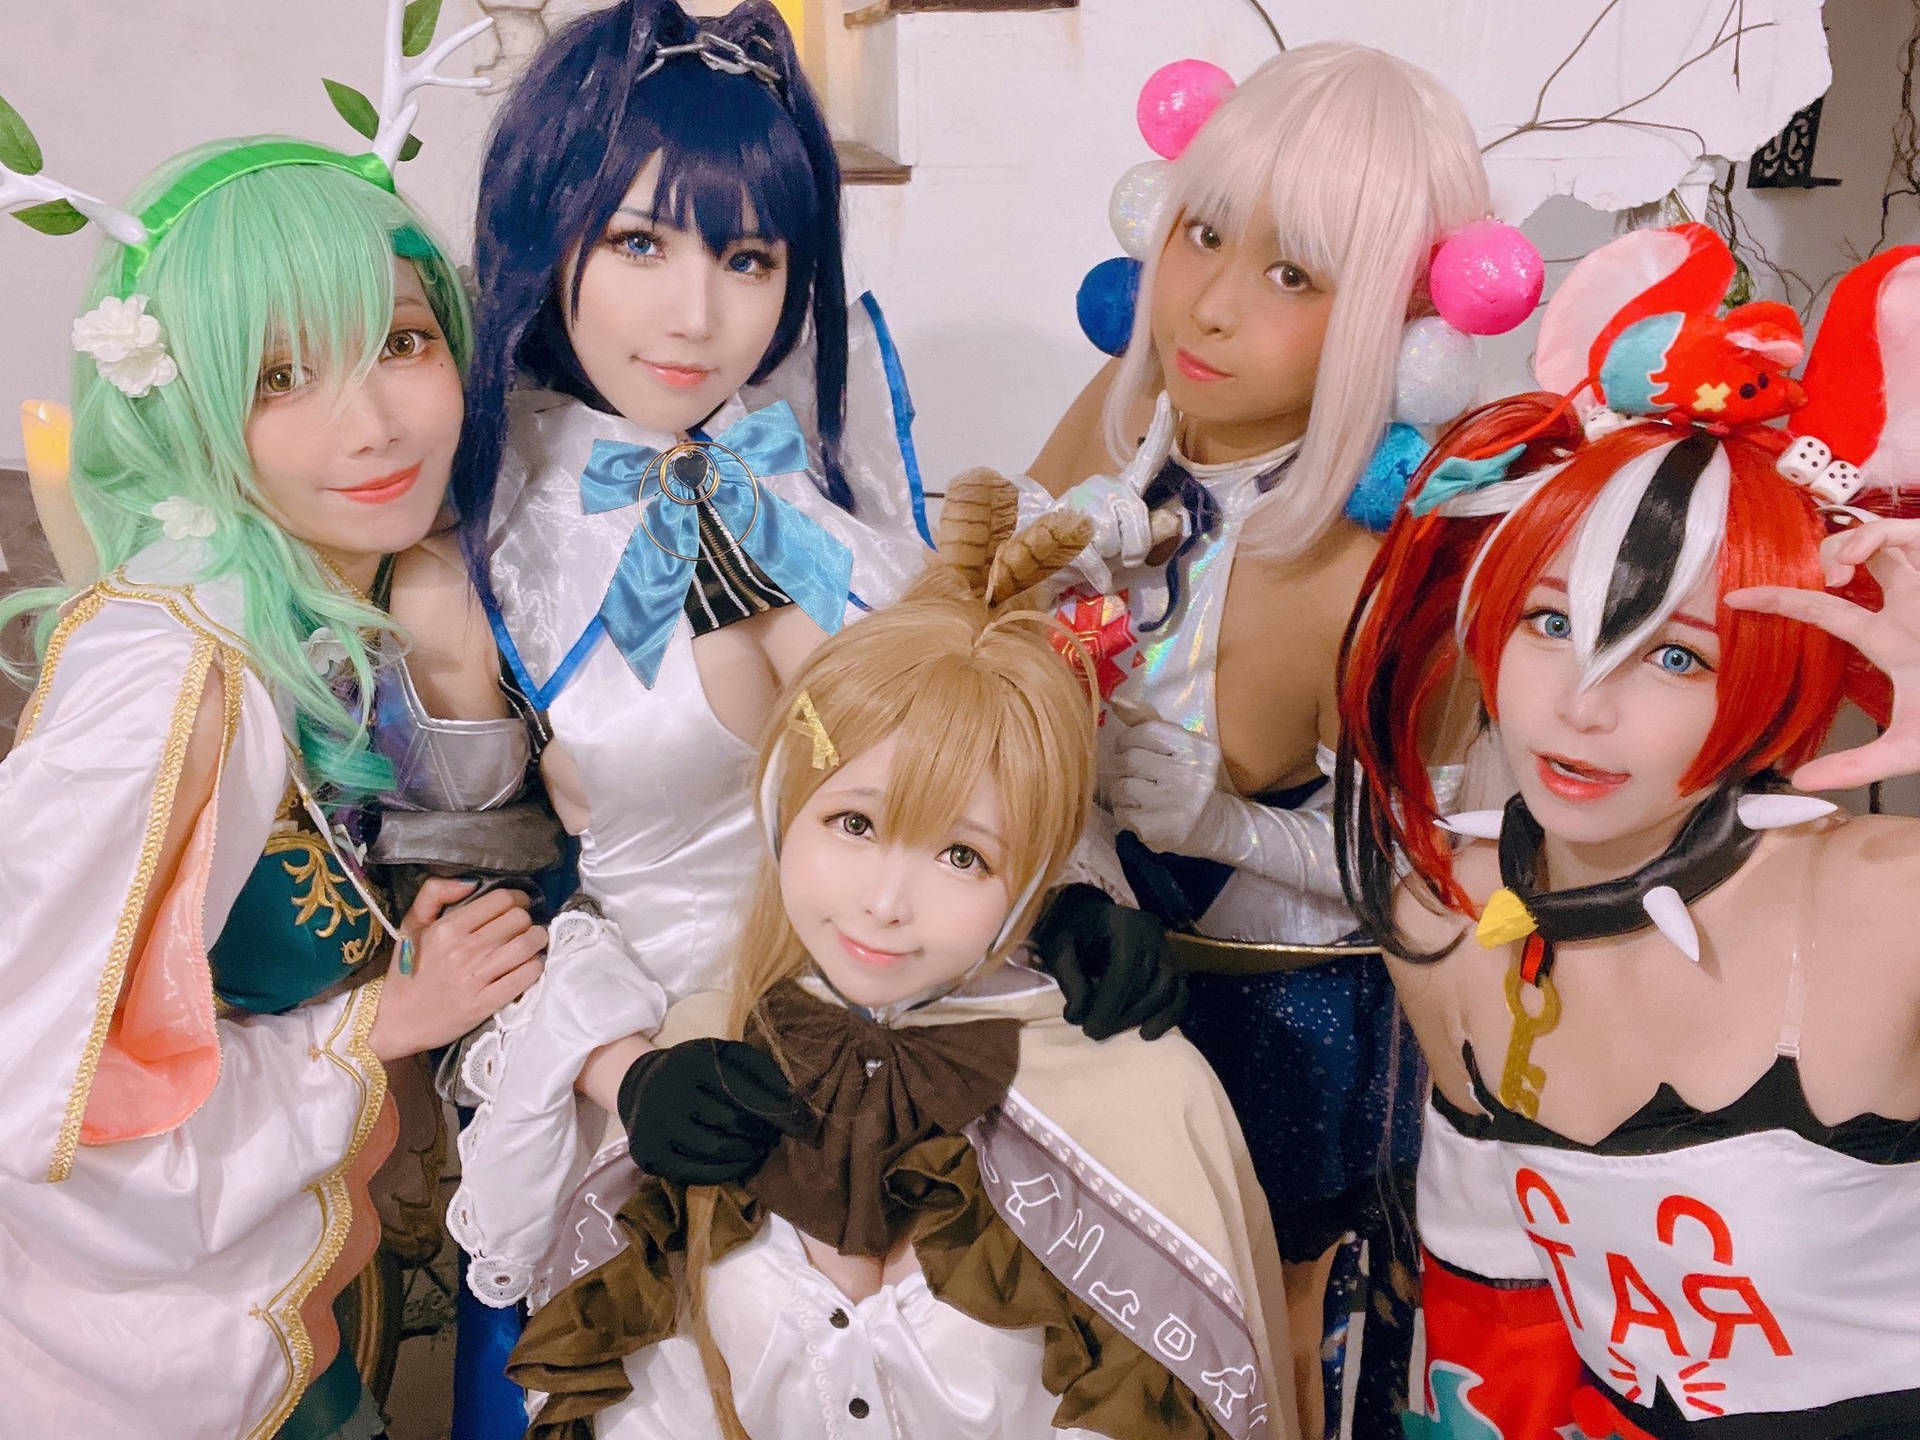 Woman Beautiful Hololive Council Cosplay Wallpaper